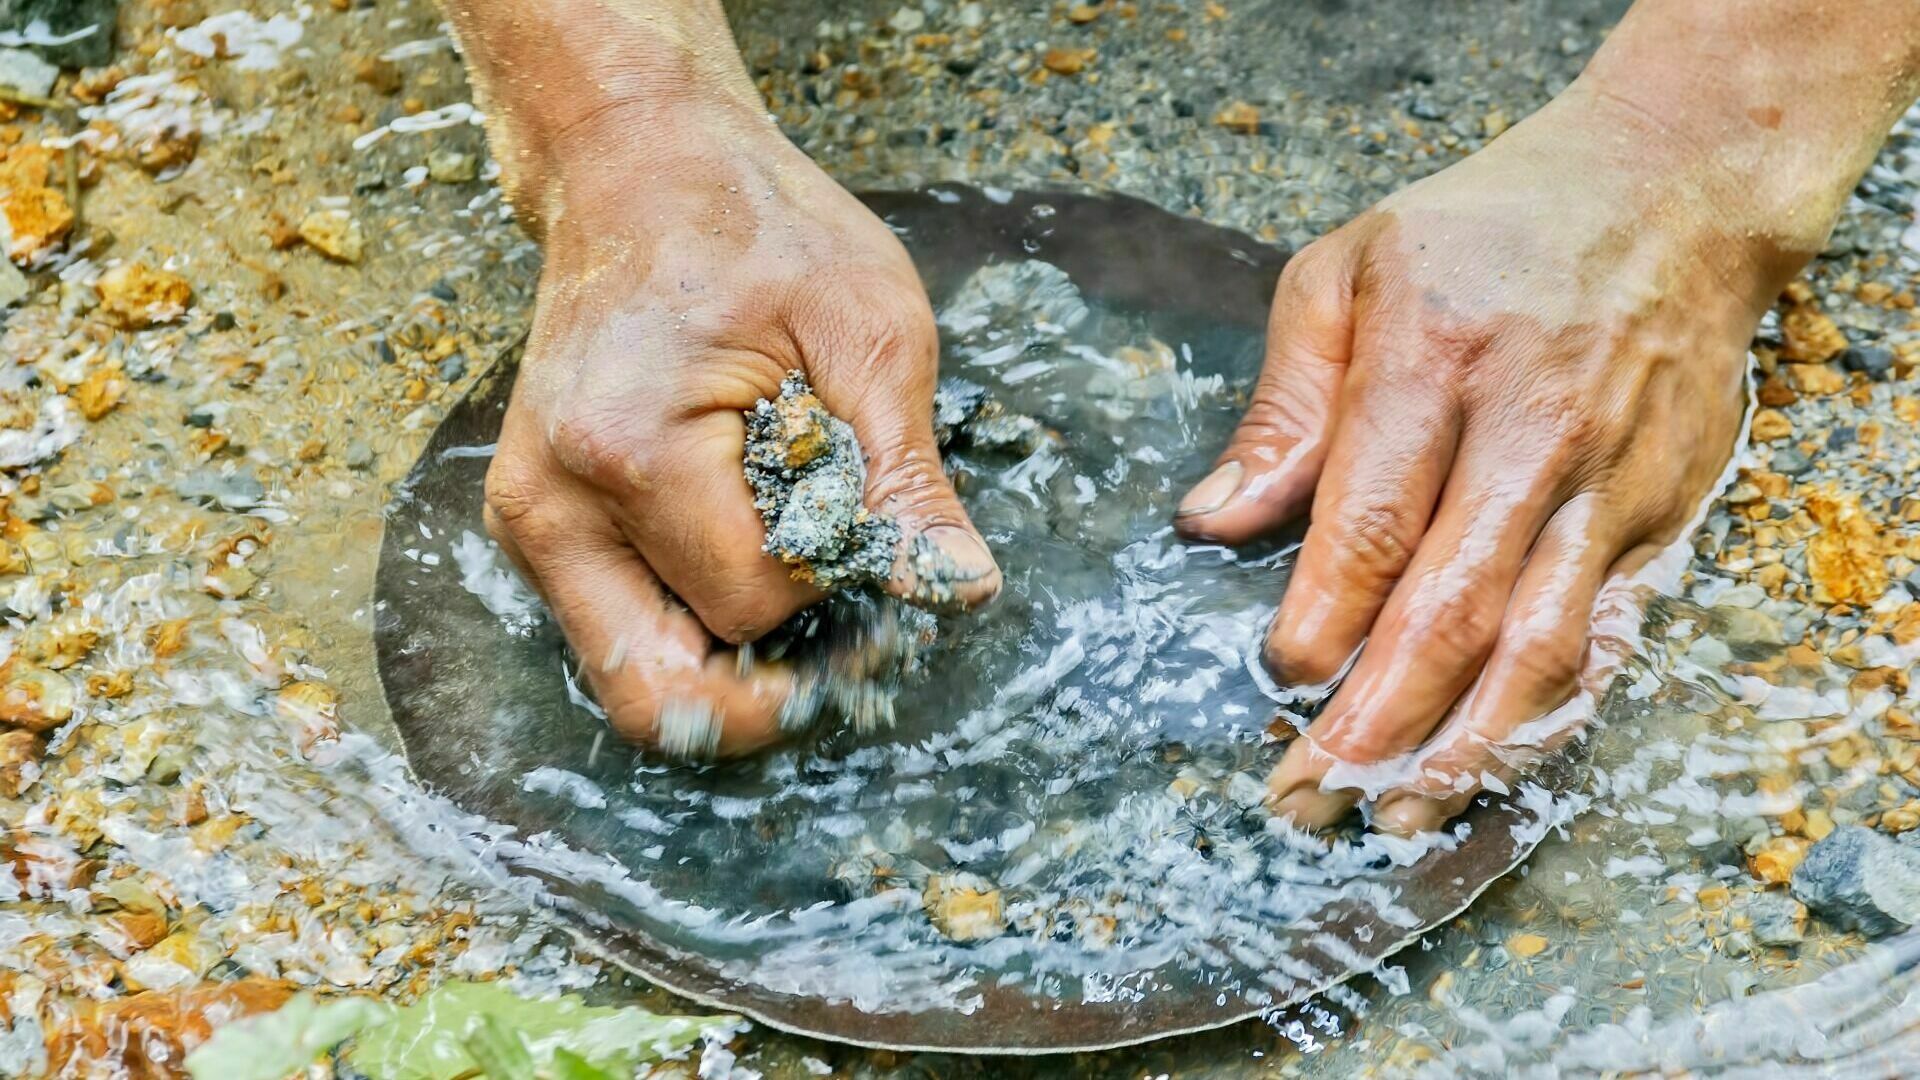 Brazilian authorities announced a hunt for illegal gold prospectors in the Amazon